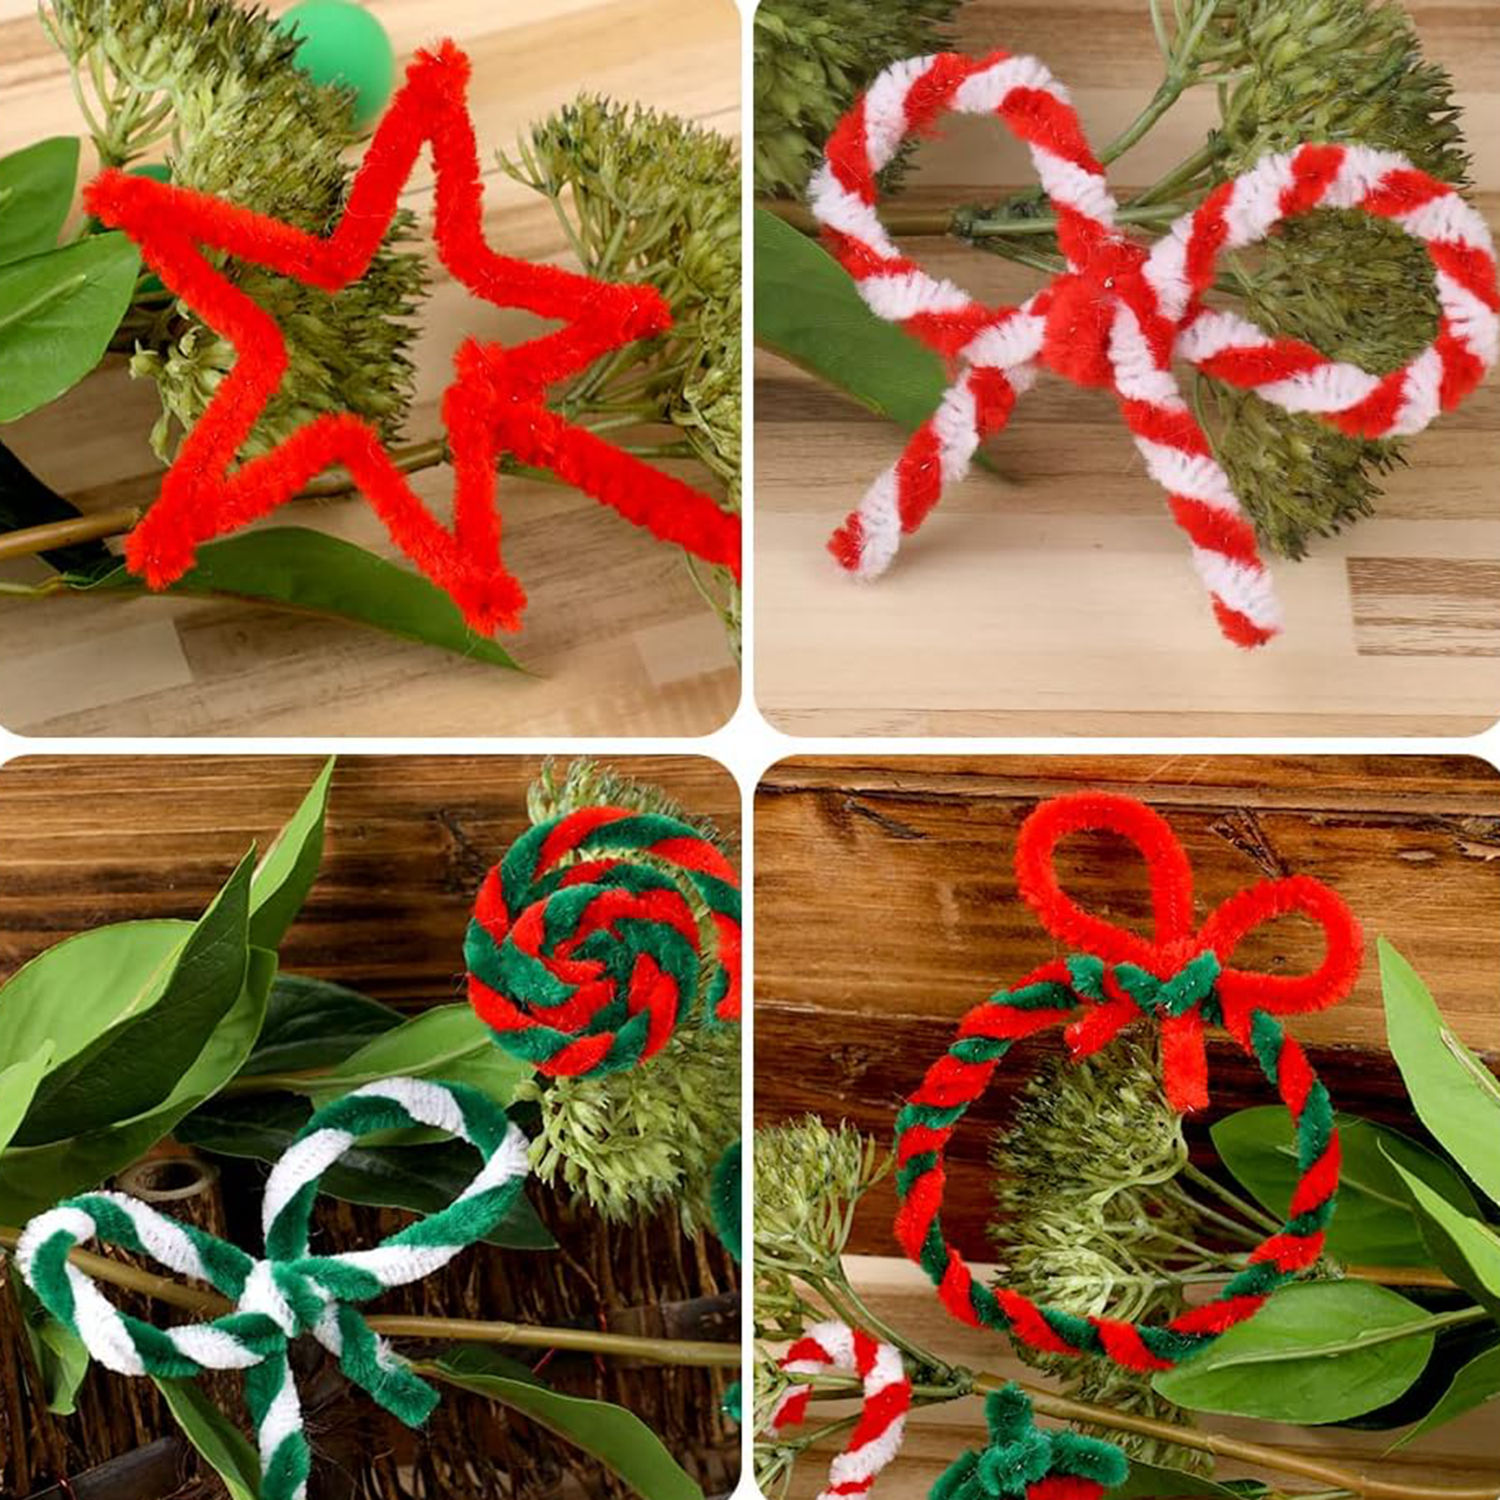  150Pcs Christmas Pipe Cleaners Craft Set Including 50Pcs Green  Chenille Stems, 50Pcs White Chenille Stems, and 50Pcs Red Pipe Cleaners for  DIY Crafts Christmas Decorations (150Pcs Red White Green) : Arts